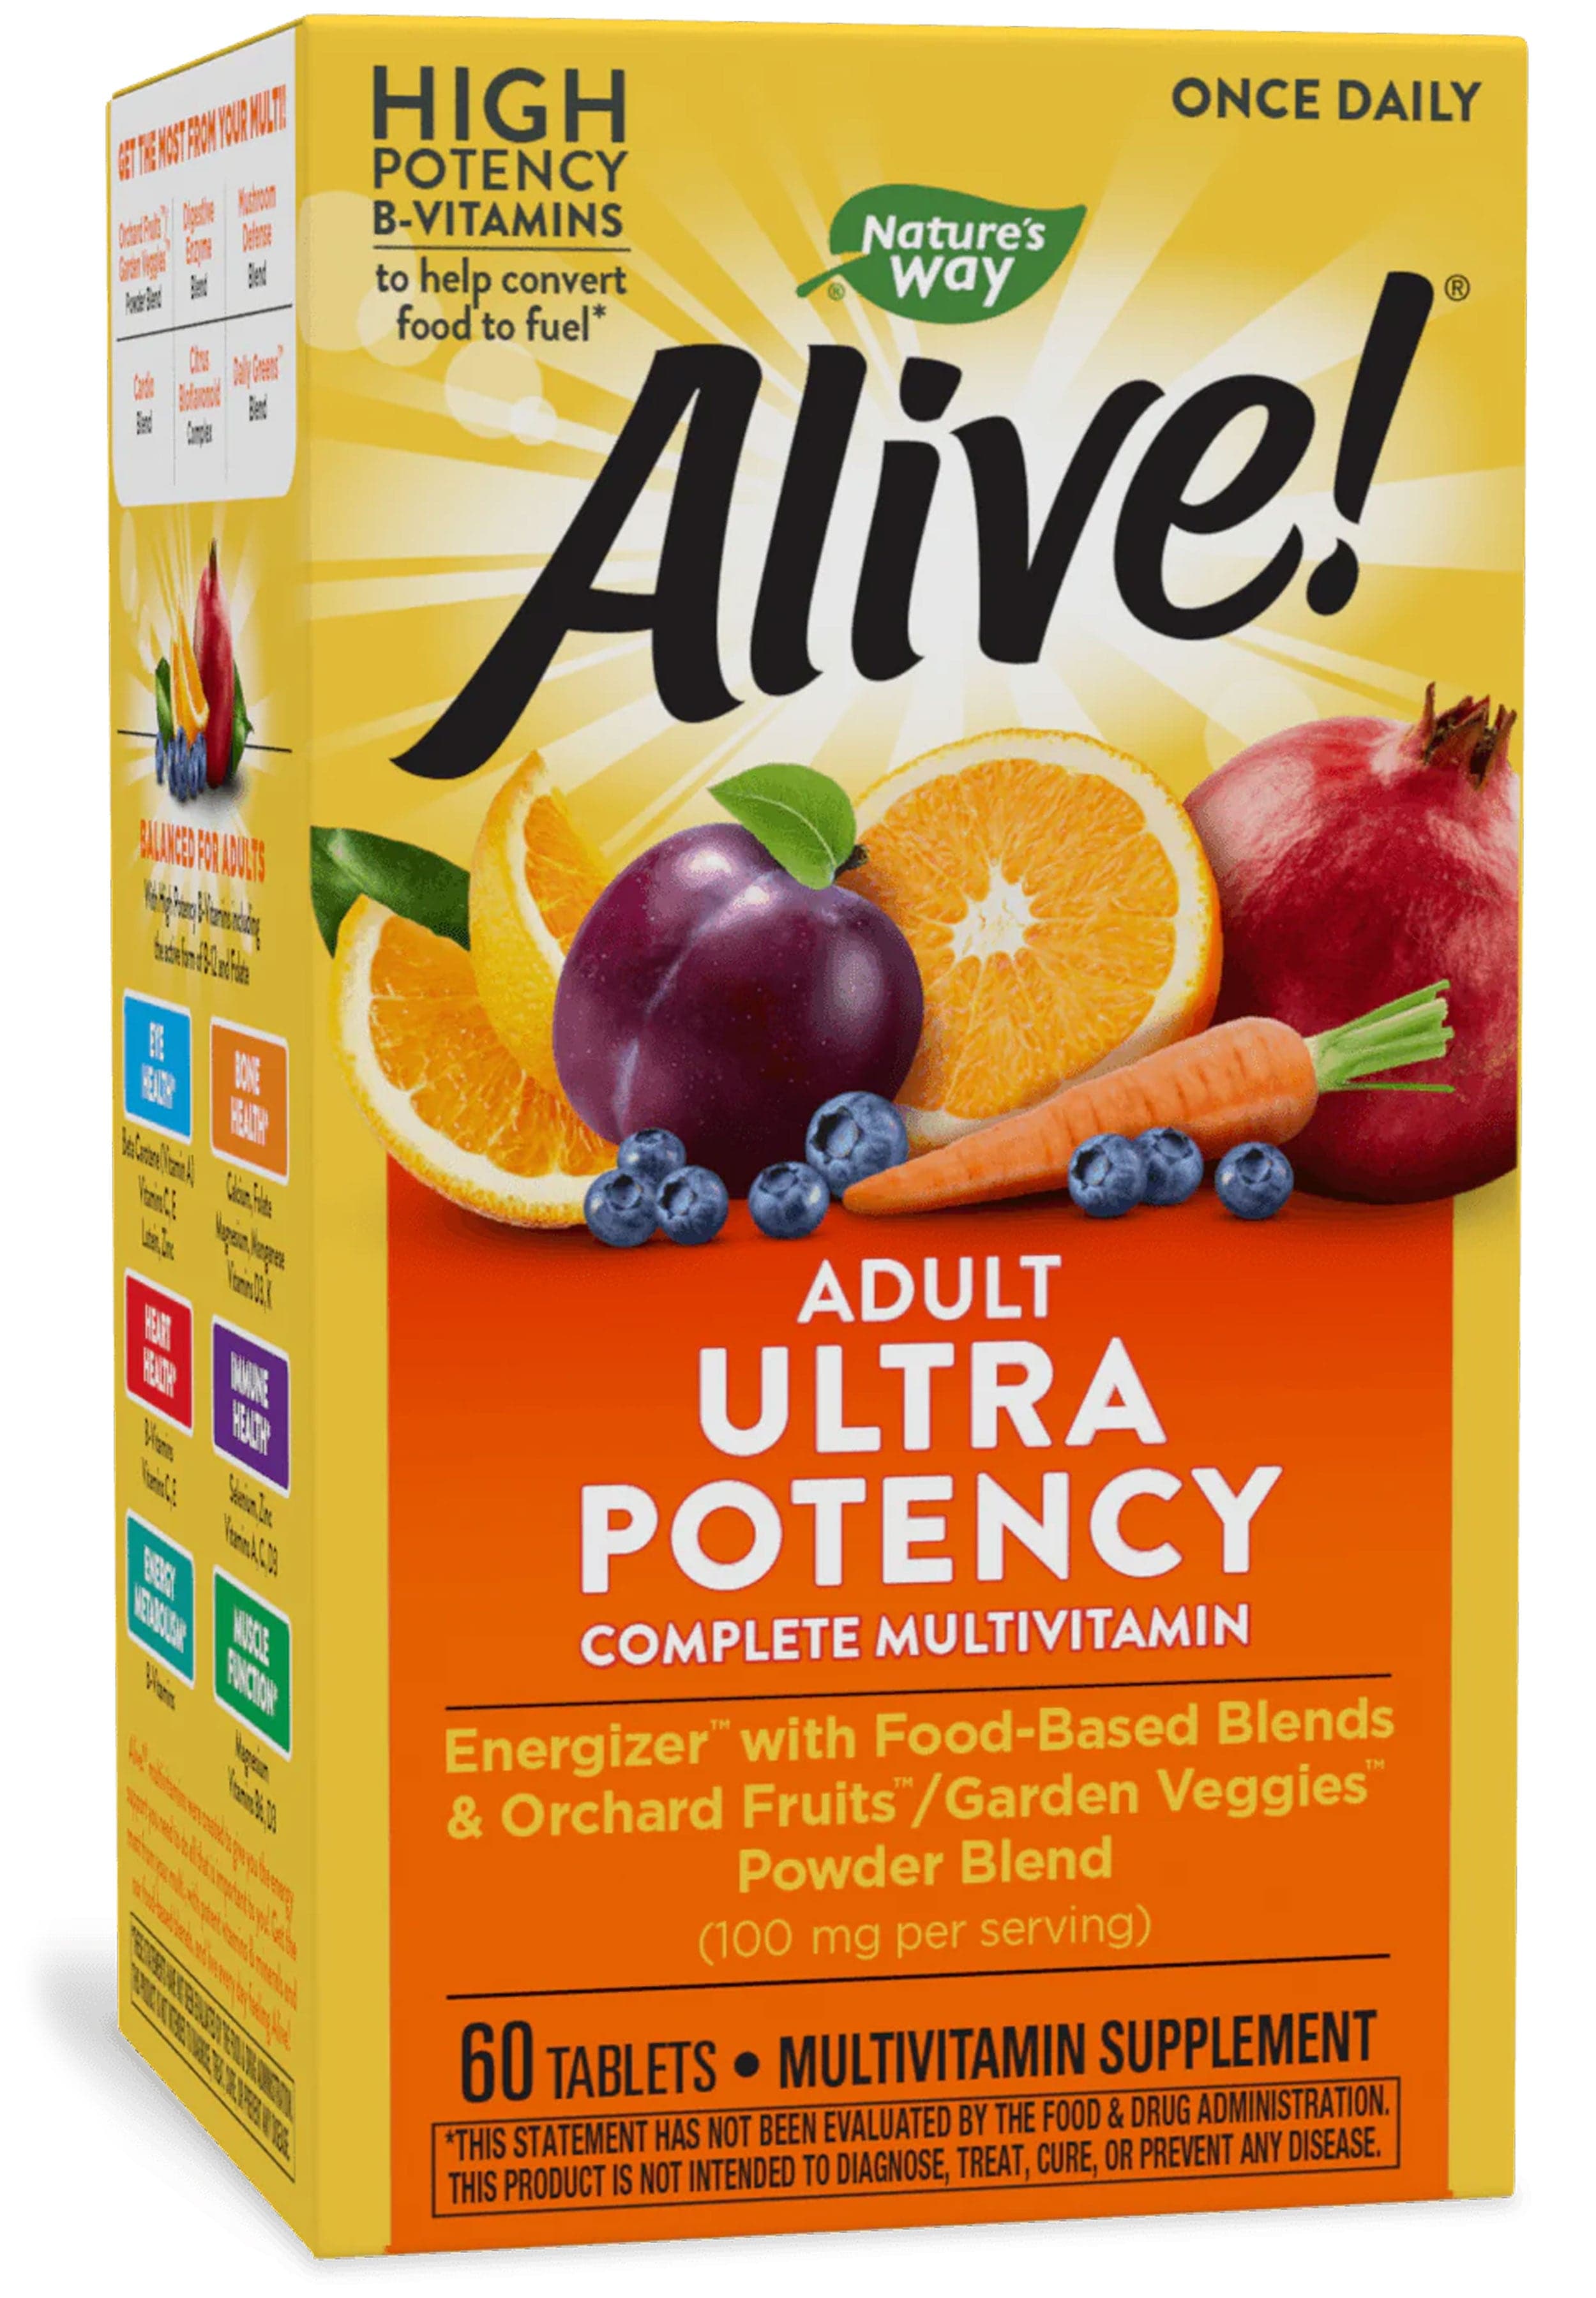 Nature's Way Alive! Once Daily Adult Ultra Potency Complete Multivitamin